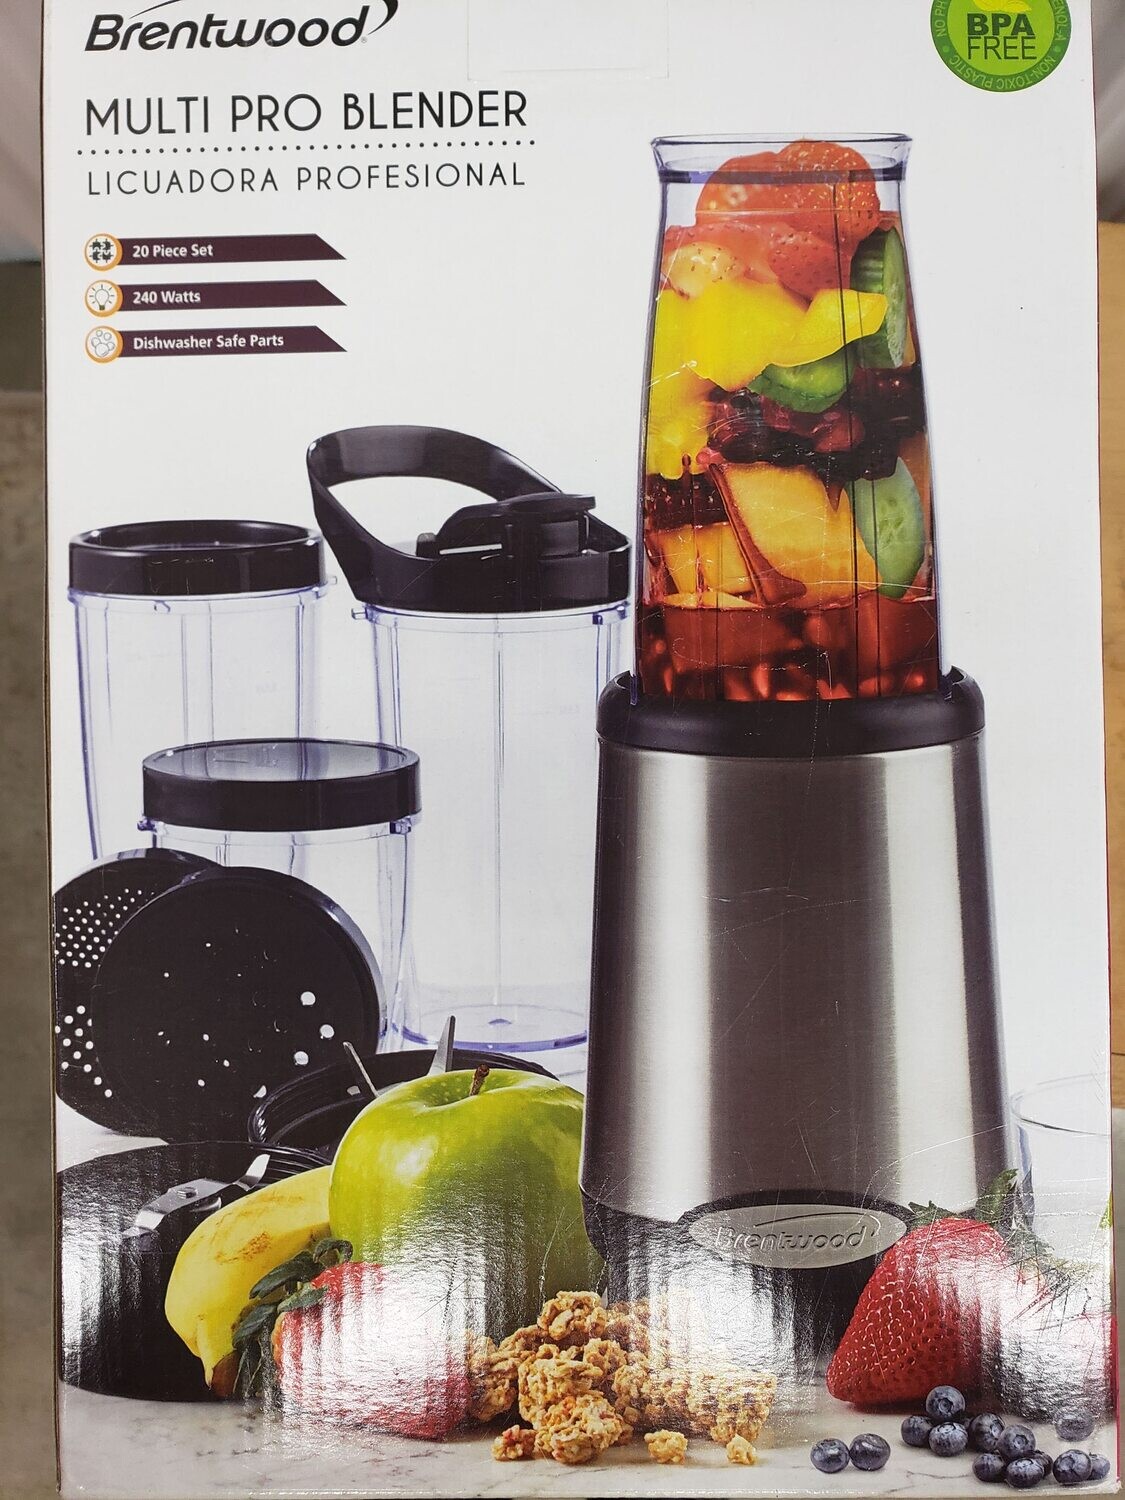 NEW Brentwood Multi Pro Personal Blender 20 Piece Set #2314